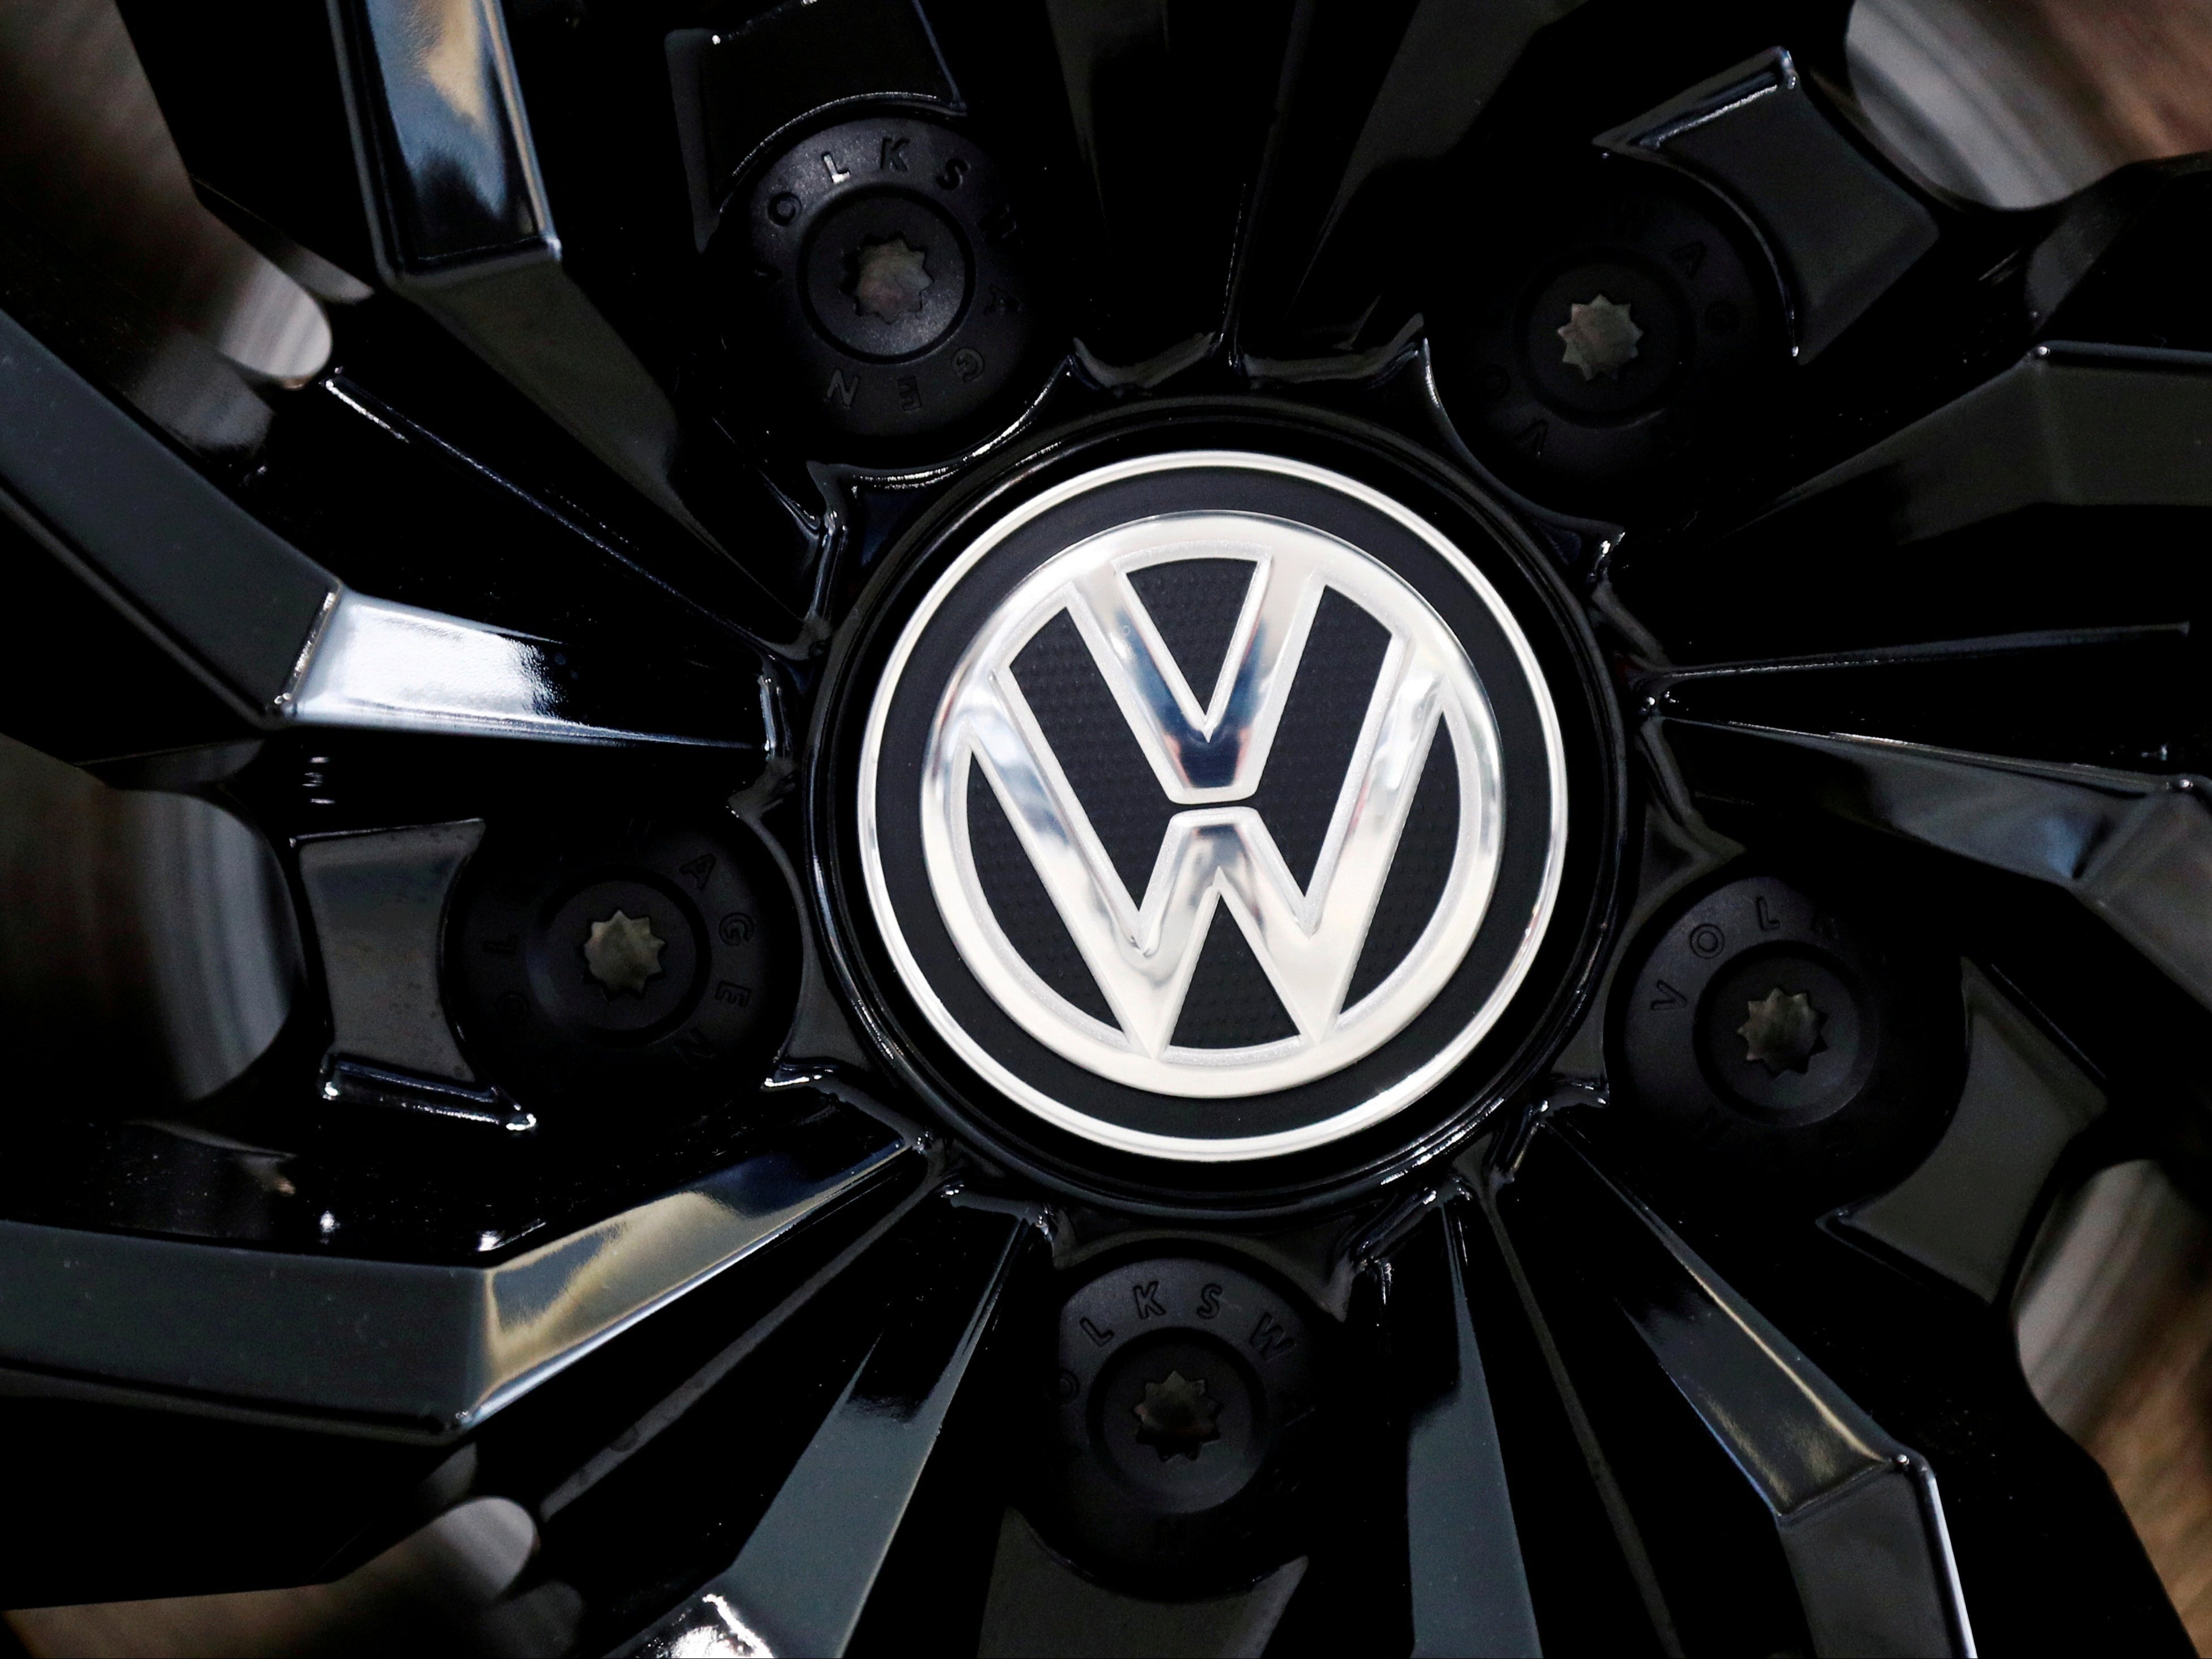 Volkswagen said the scheme to limit the benefit of nitrogen-oxide-scrubbing technology was never acted on